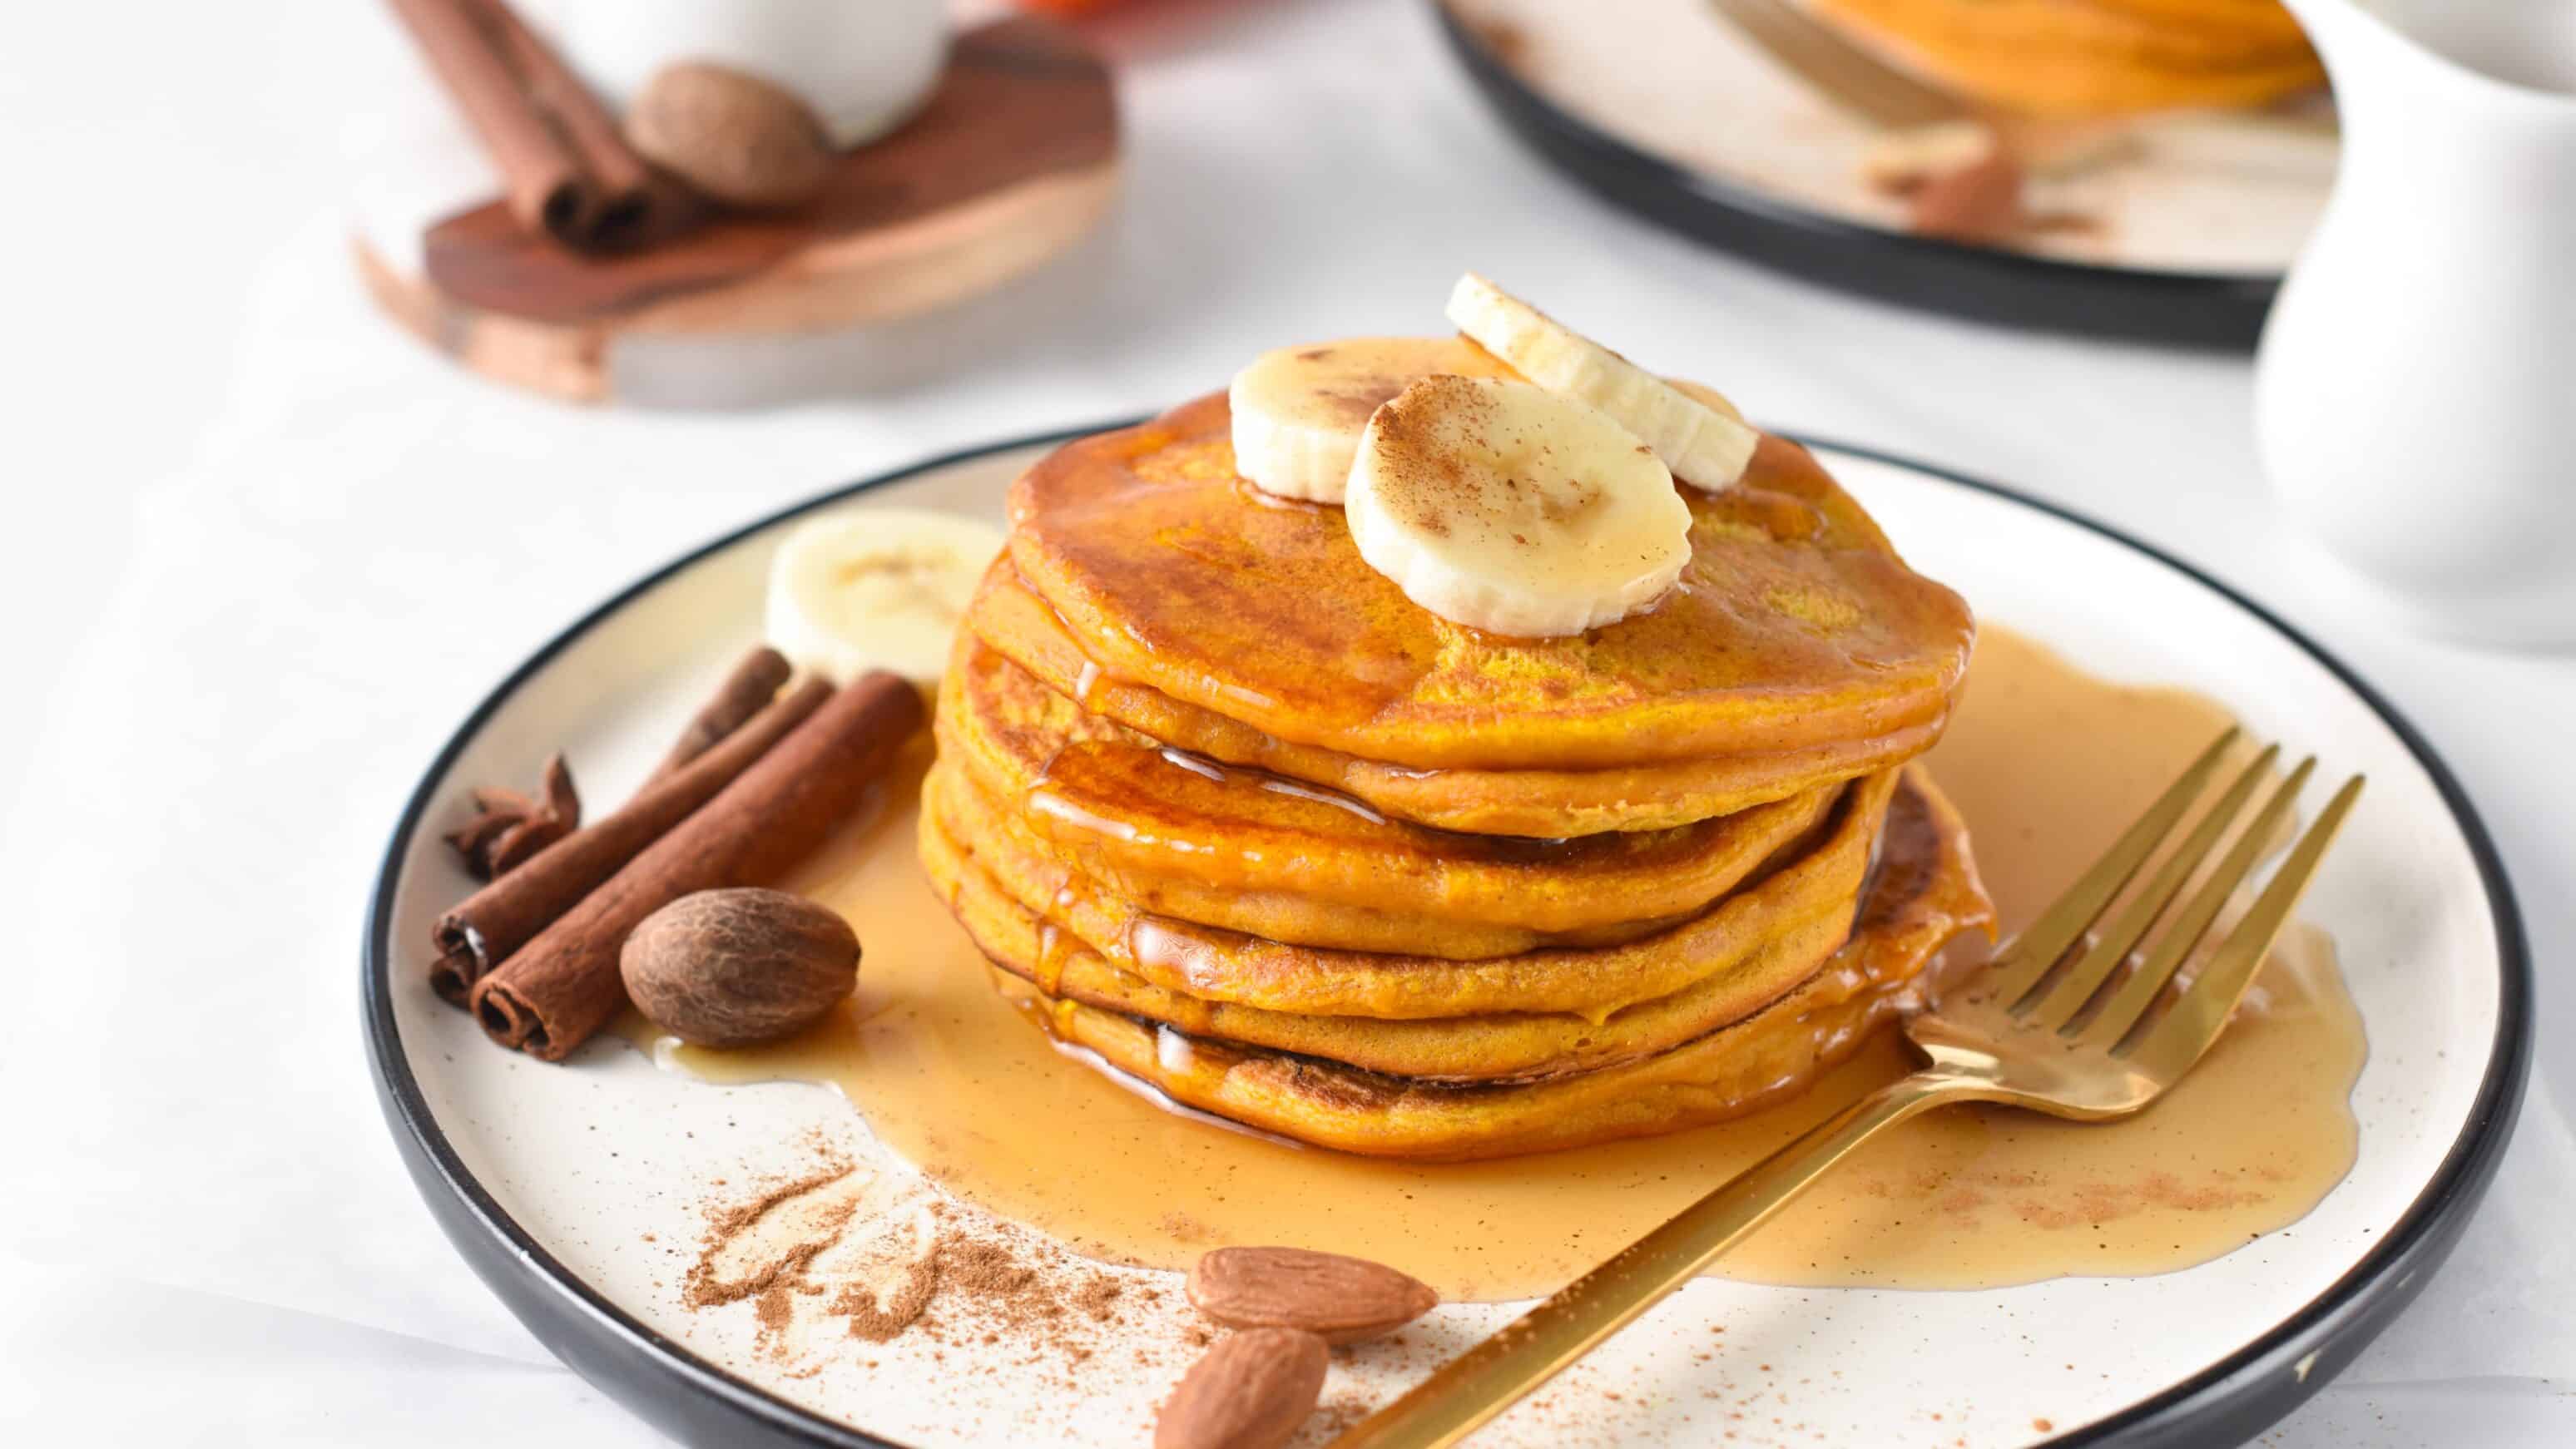 Stack of Pumpkin Protein Pancakes on a plate with banana slices, cinnamon sticks, almonds, and a golden fork.